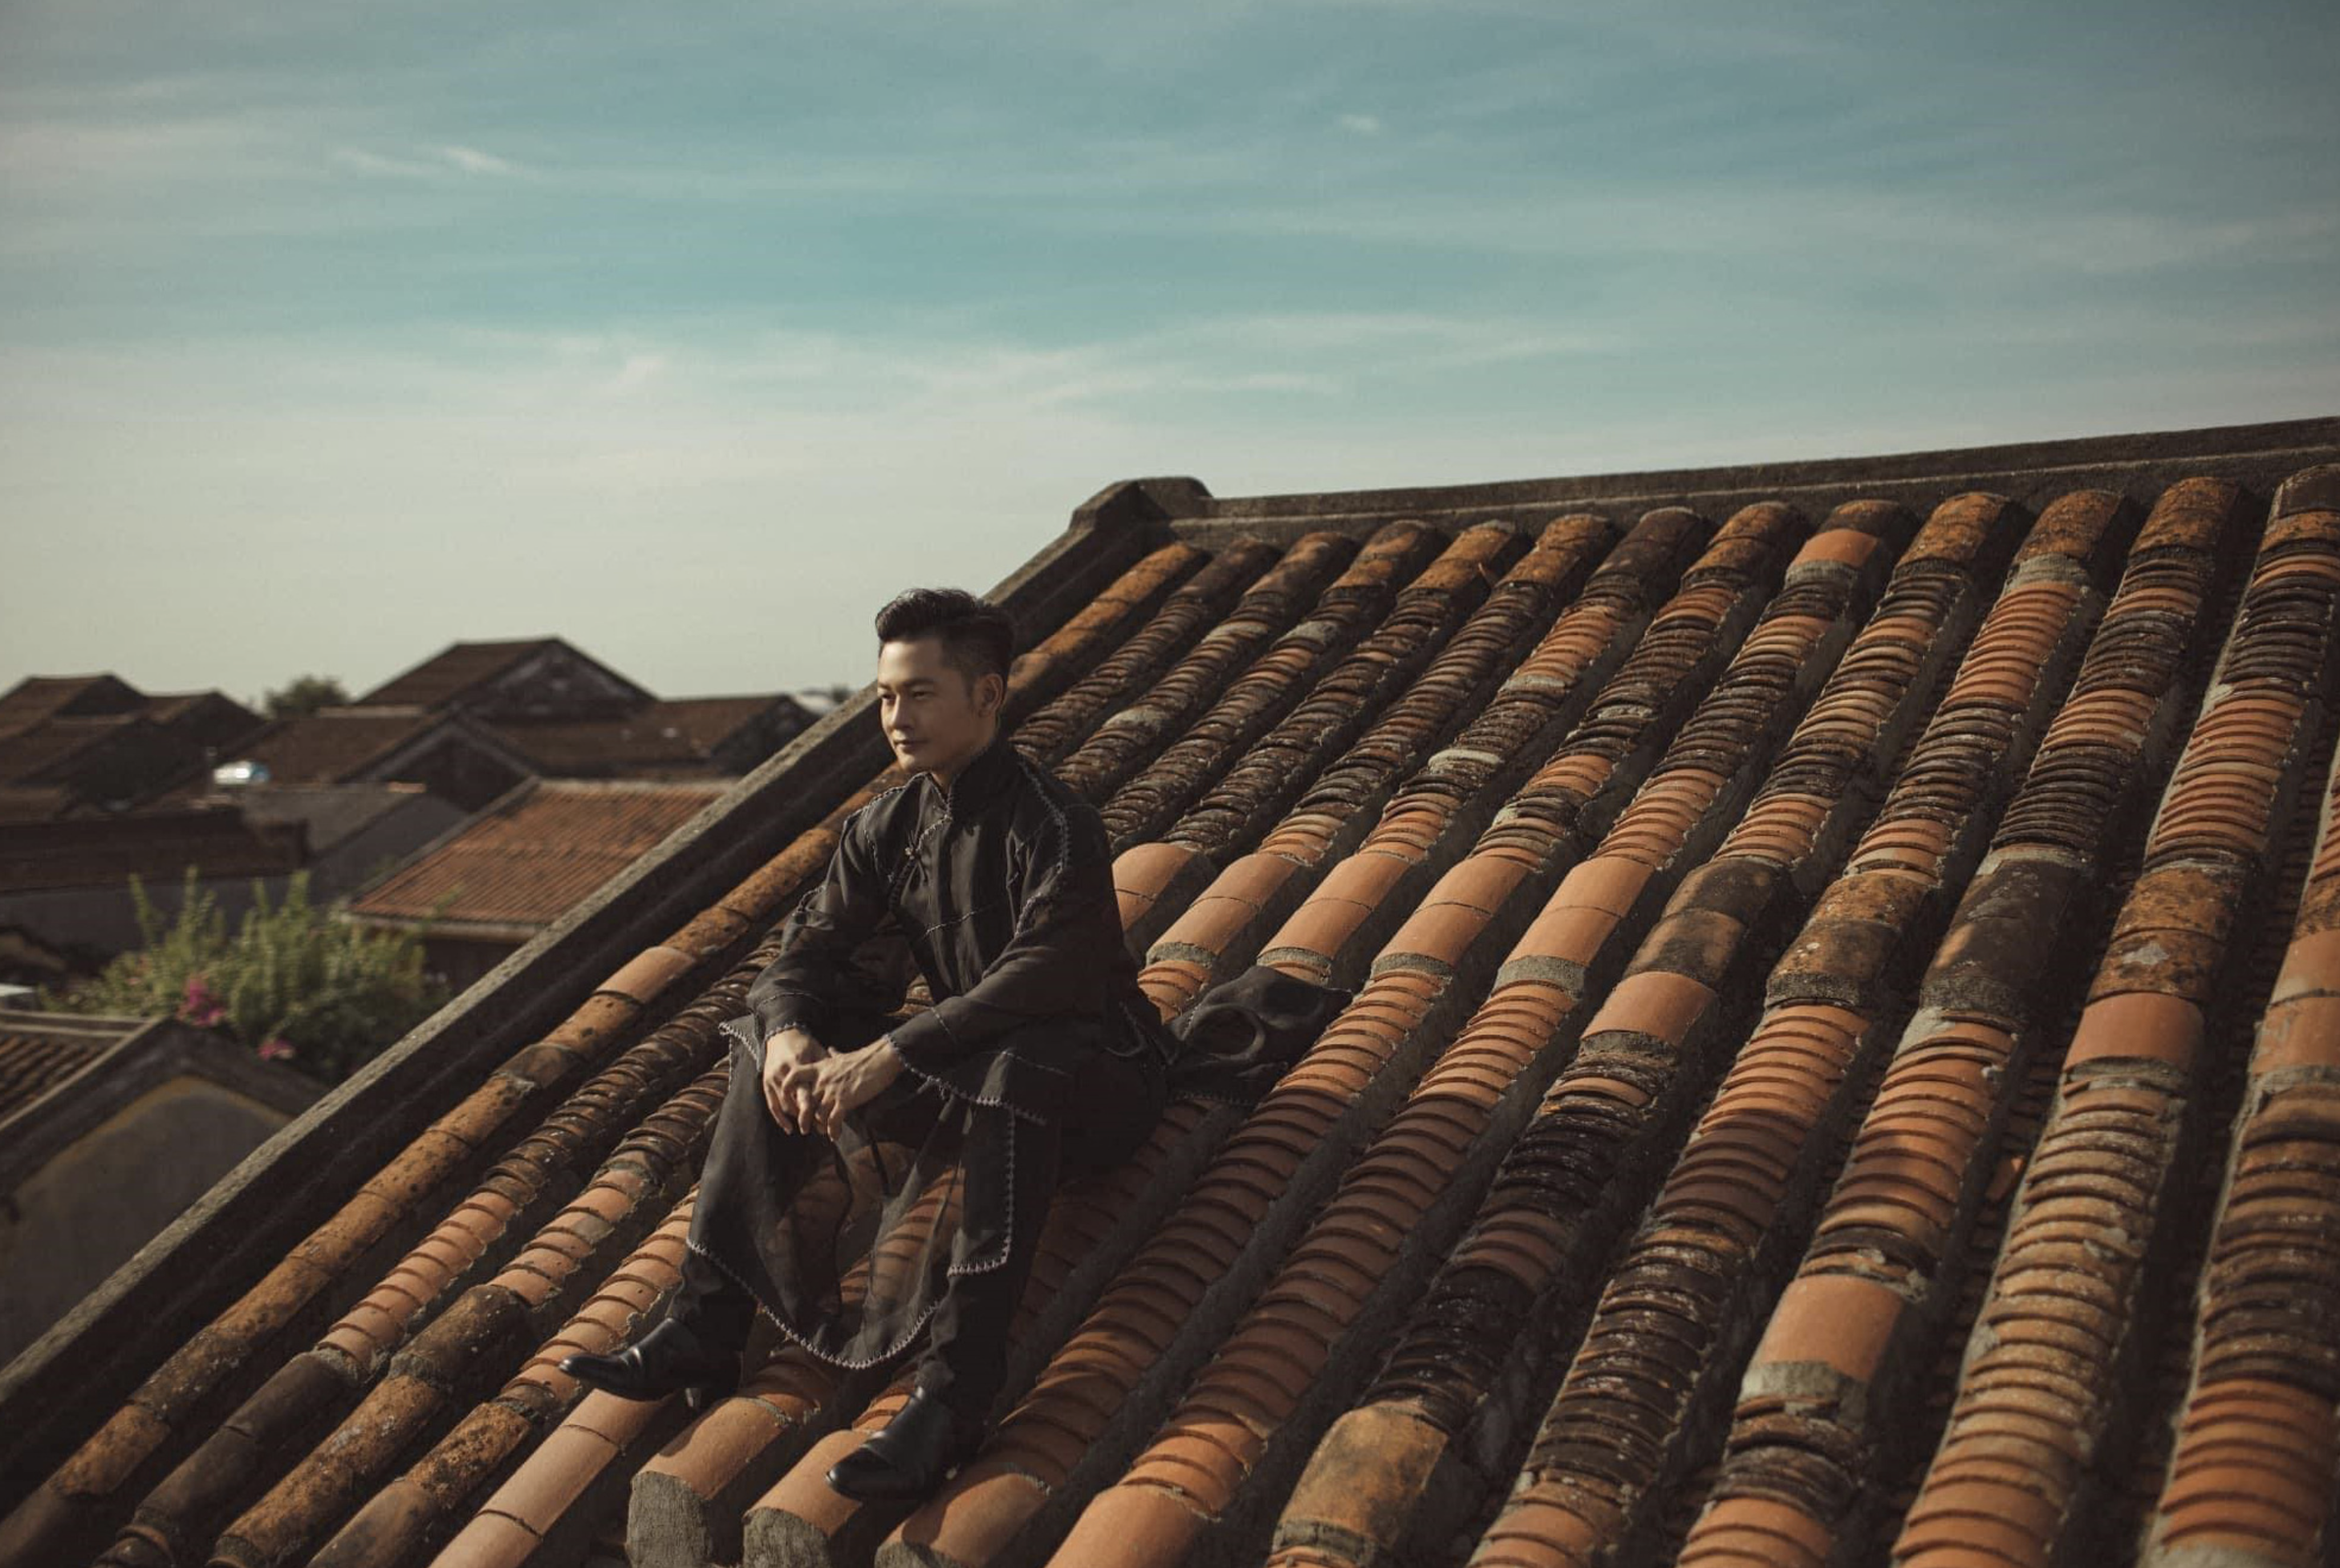 Vietnamese singer causes outrage by posing on an old house in Hoi An